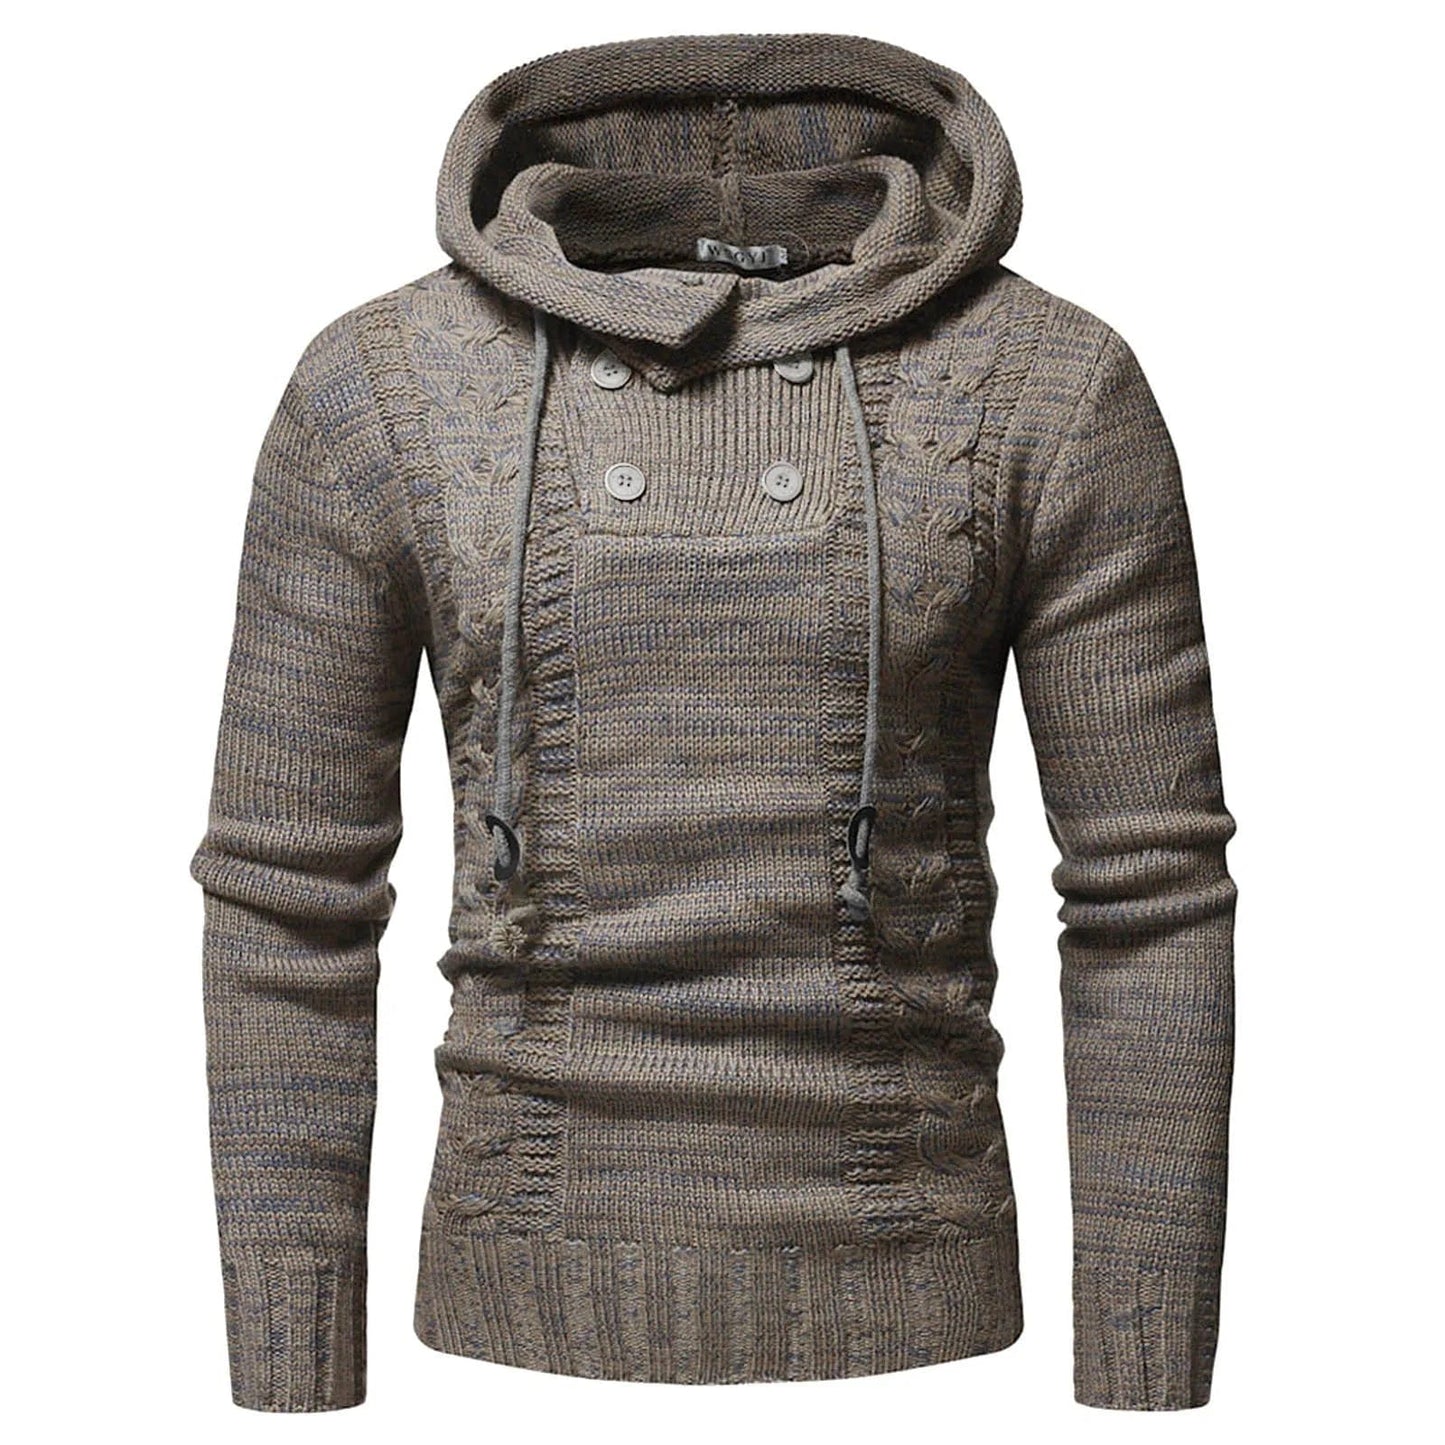 Men'S Knitting Tops Spring Autumn High Collar Hooded Sweater Tops Fashion Solid Color Slim Fit Pullovers Winter Casual Tops